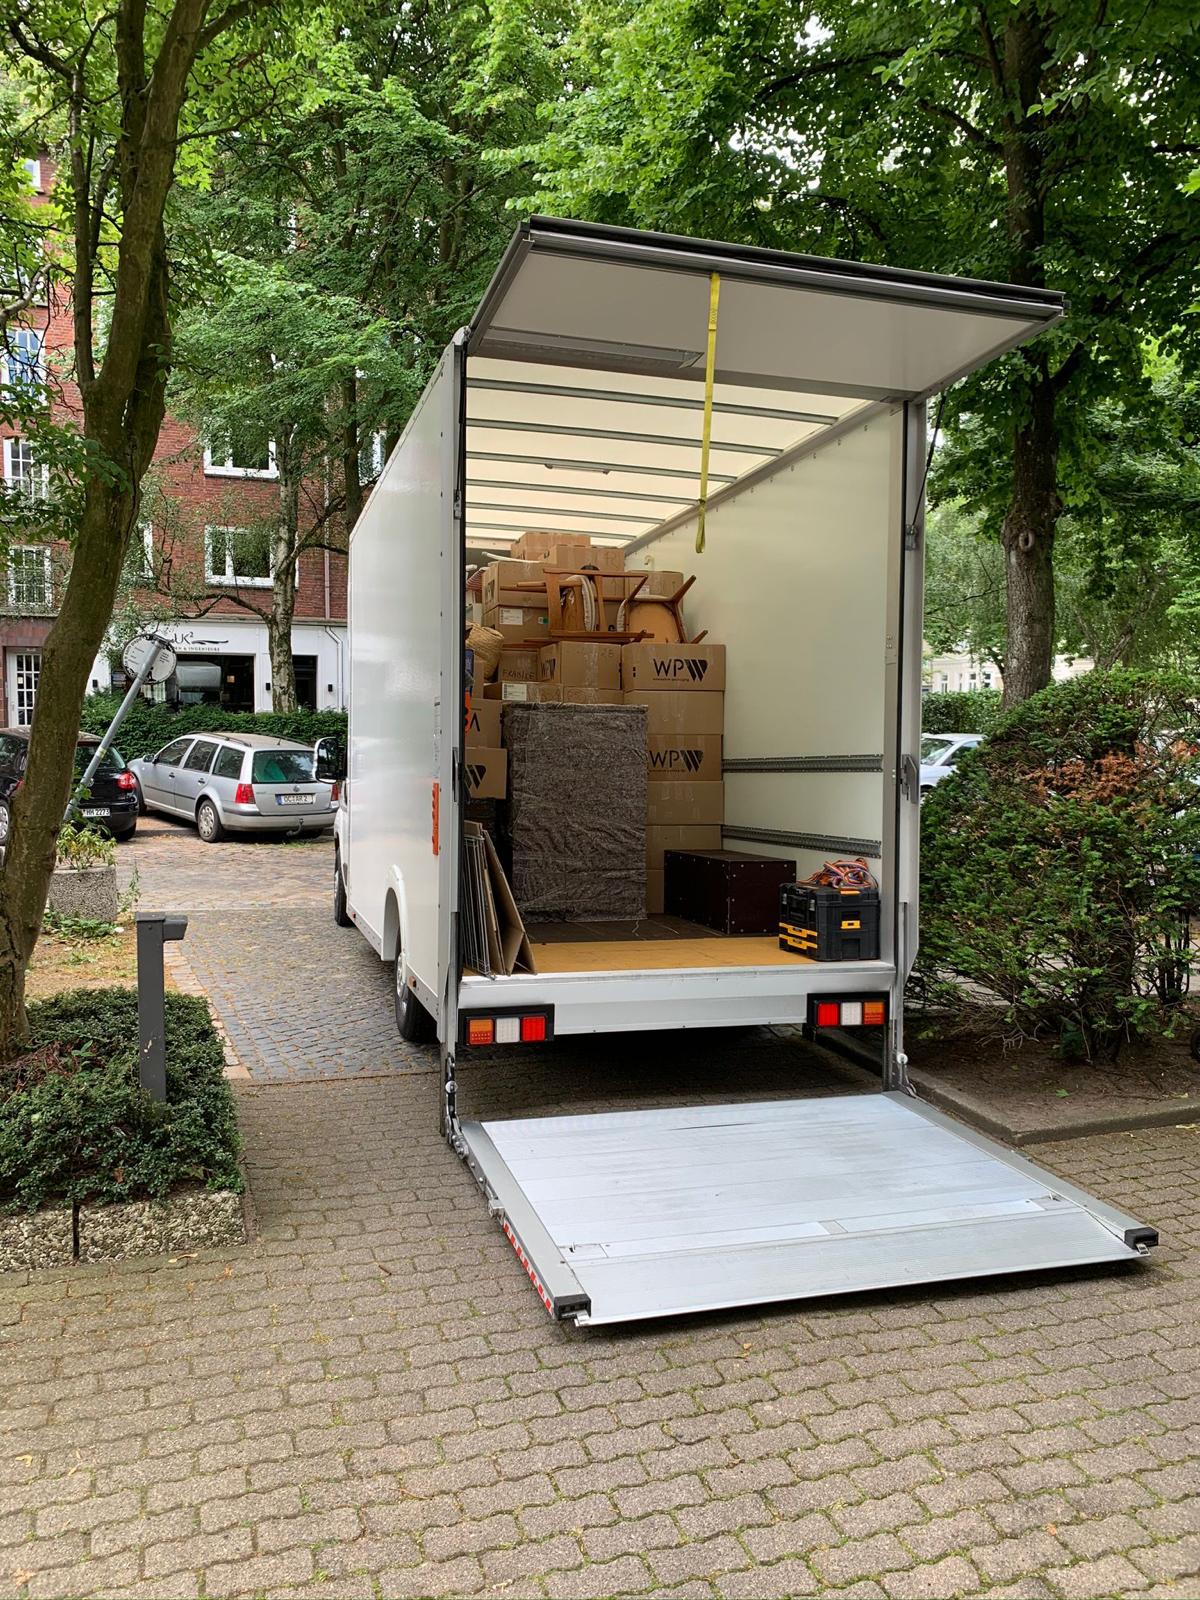 Home 2 Home Movers - H2H - House Removals - Office Removals - Man and Van